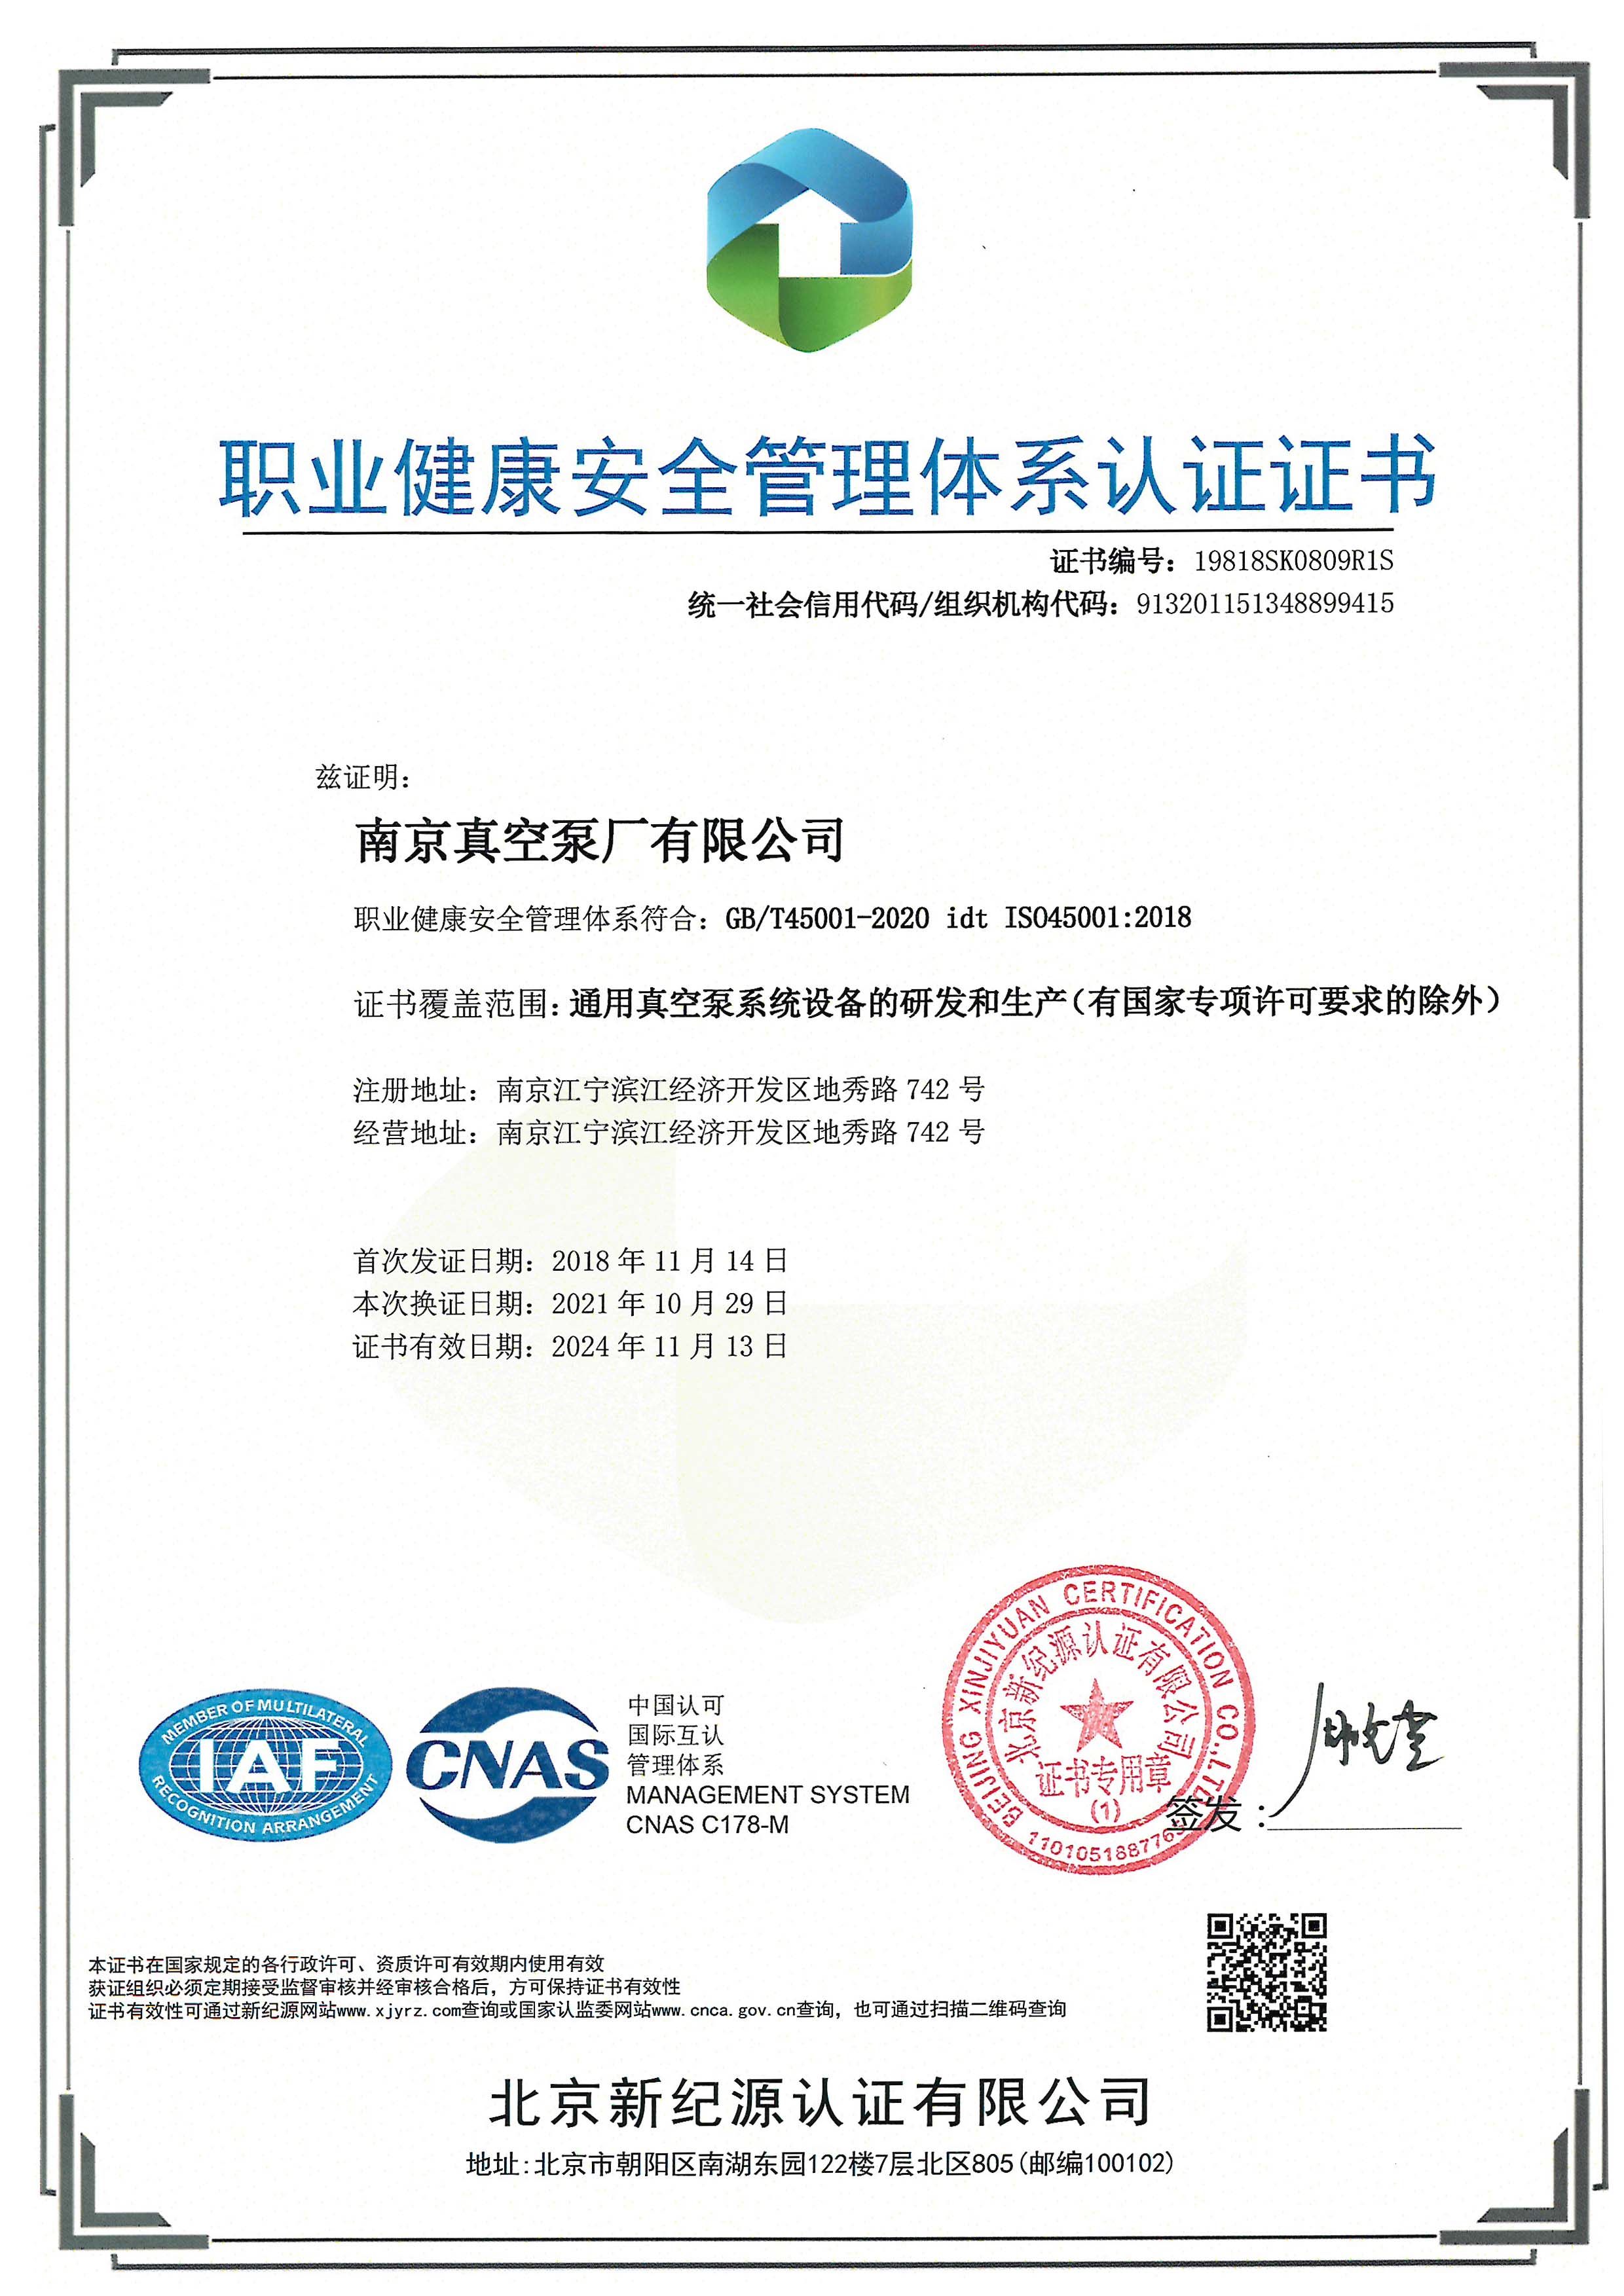 Occupational health and Safety Management System certification